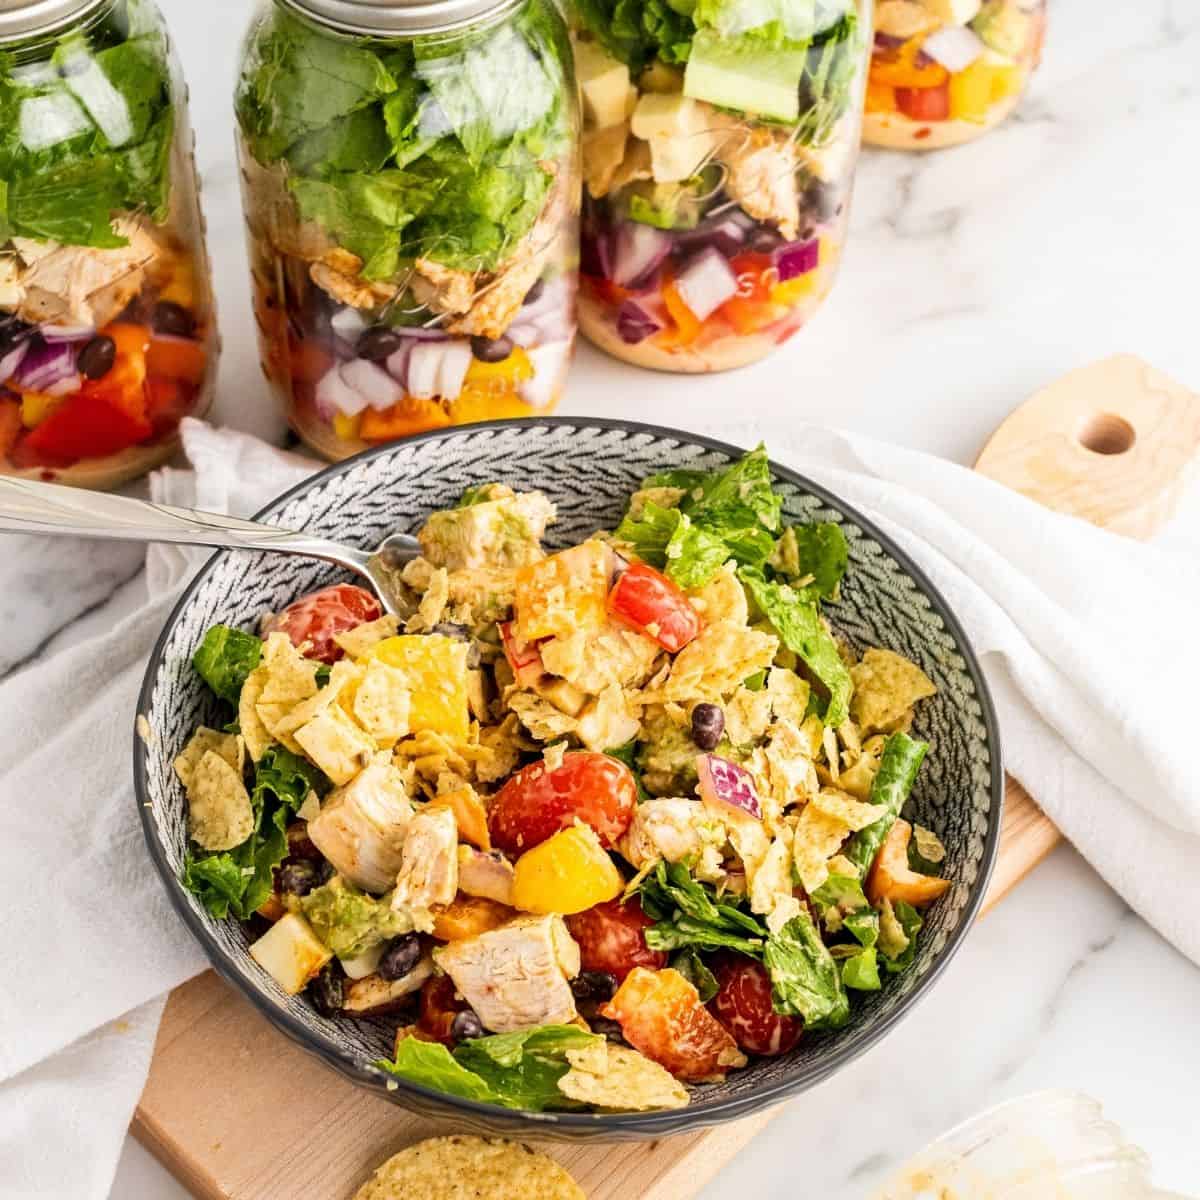 Southwest Steak Meal Prep Salads - Cooks Well With Others